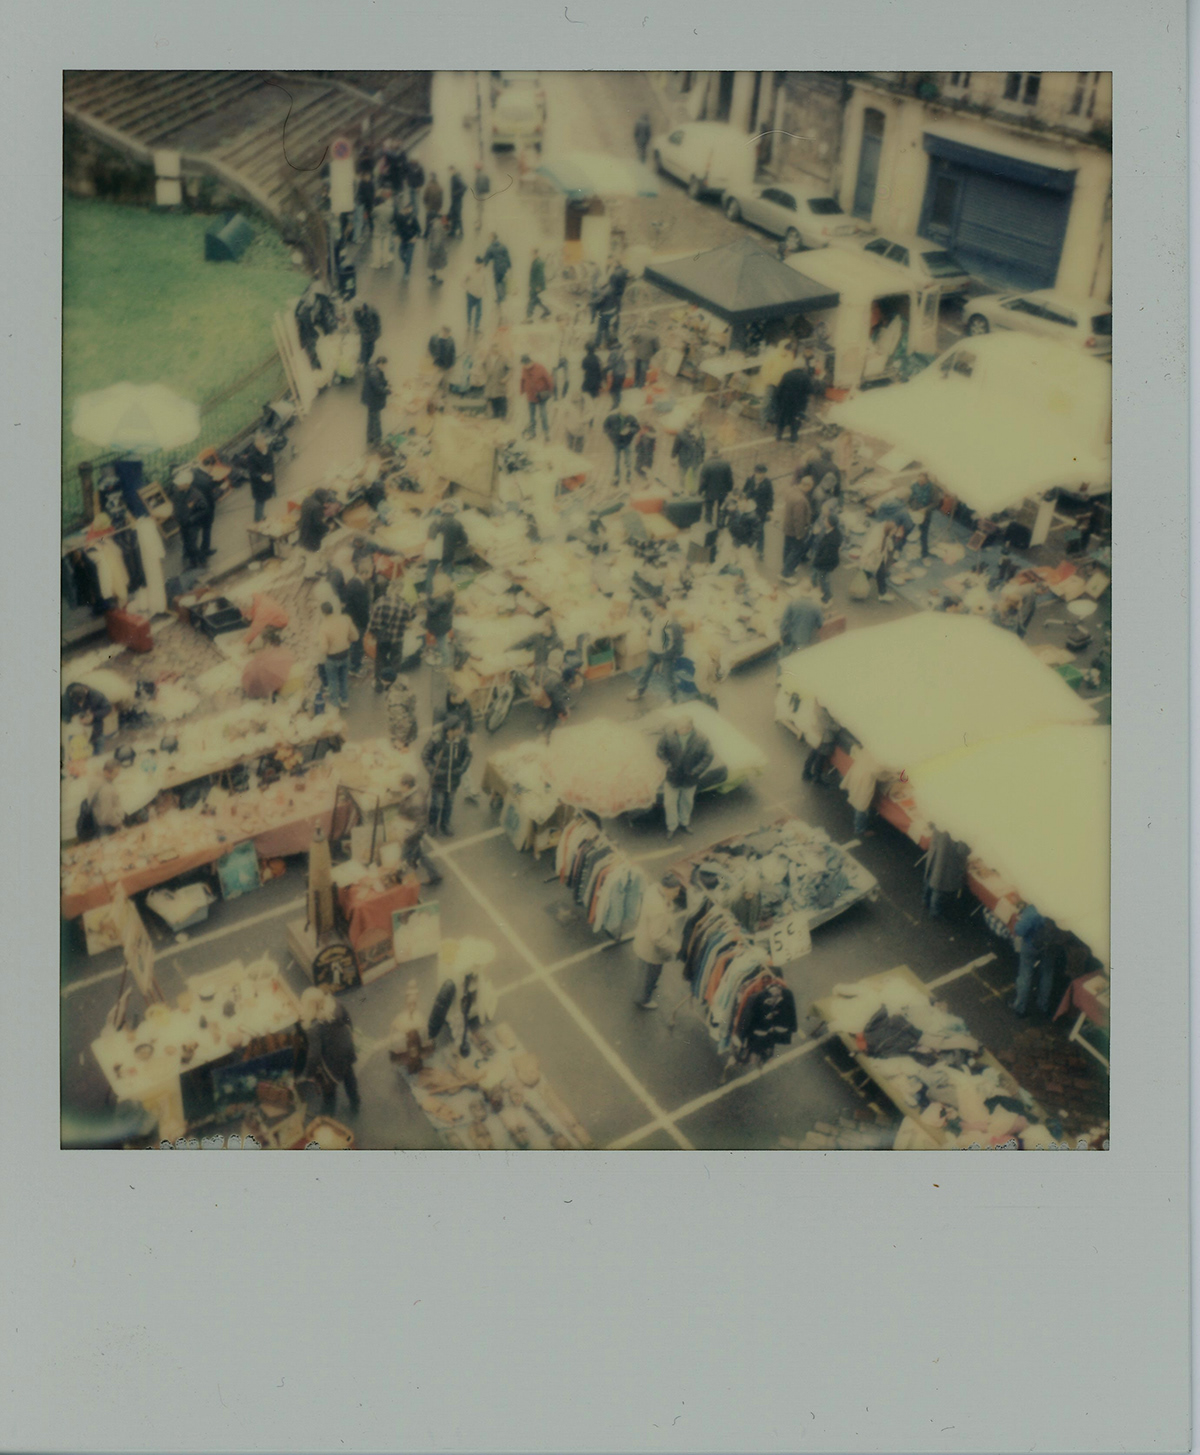 instant film vintage POLAROID impossible project